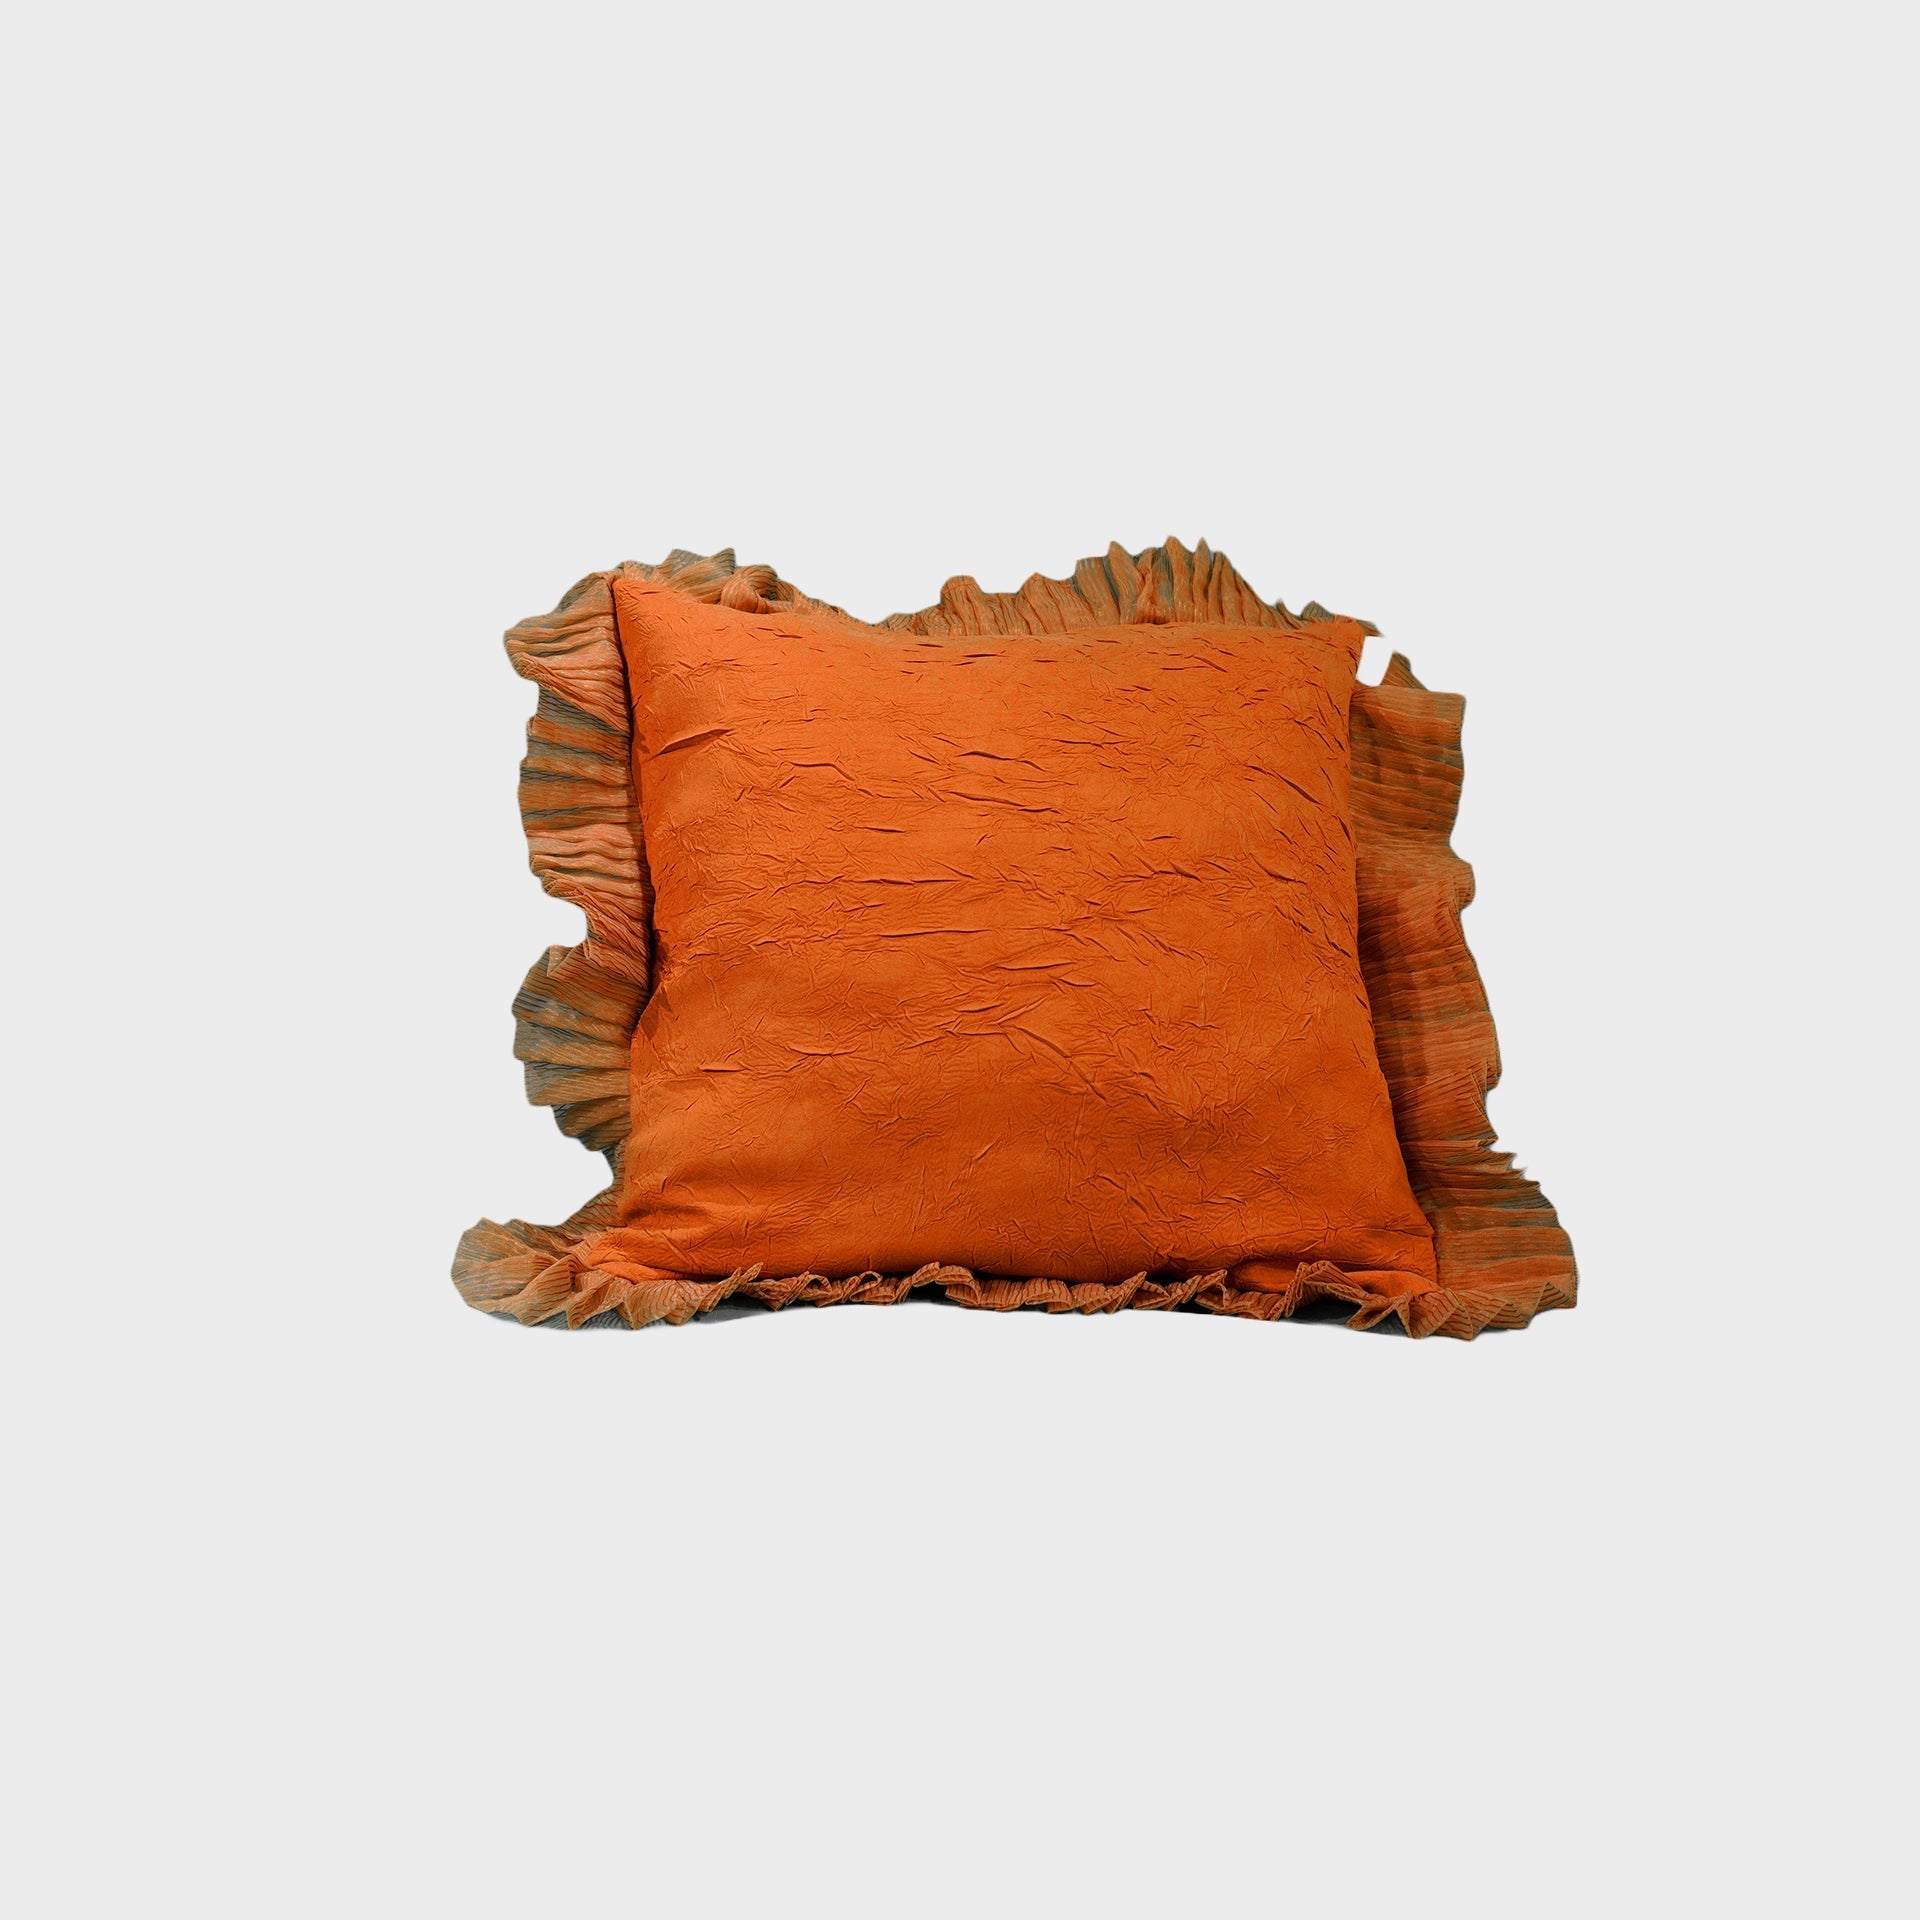 Rustic Ruffle Cushion Cover Sets at Kamakhyaa by Aetherea. This item is Cotton, Cushion, Cushion covers, Home, Orange, Plain, Ruffles, Solid, Upcycled